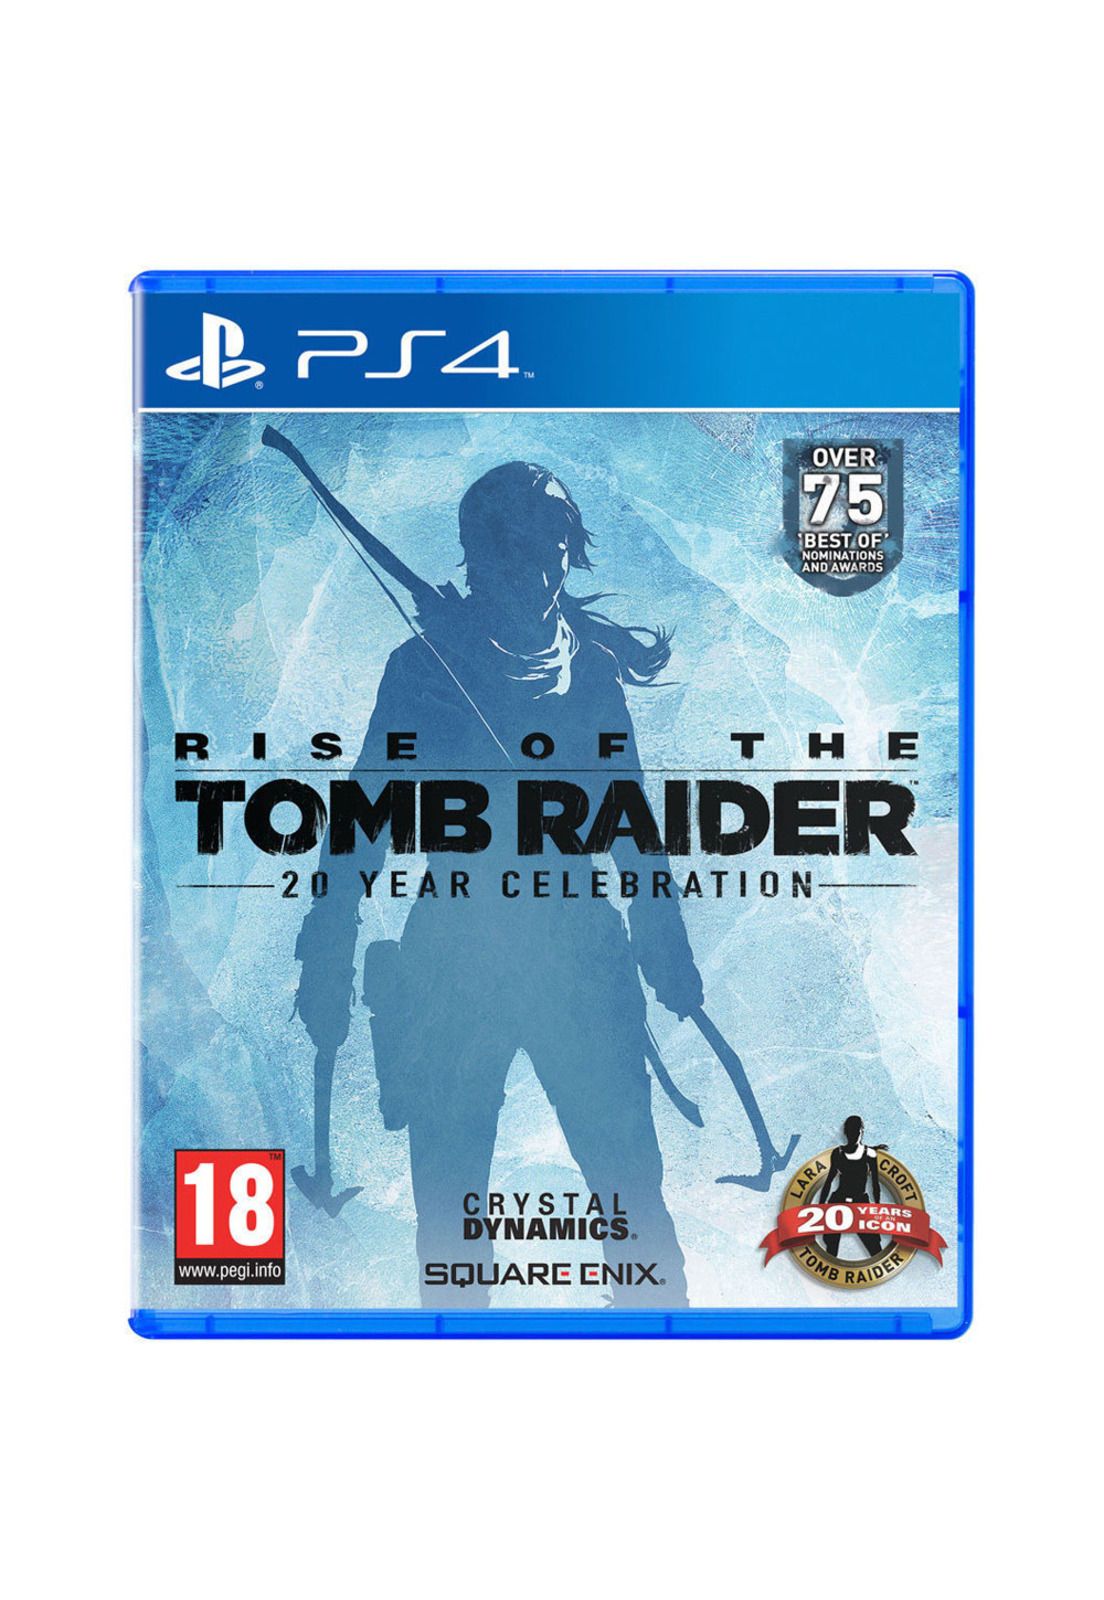 Rise of the Tomb Raider - 20 Year Celebration Edition (Europeo) (PS4)